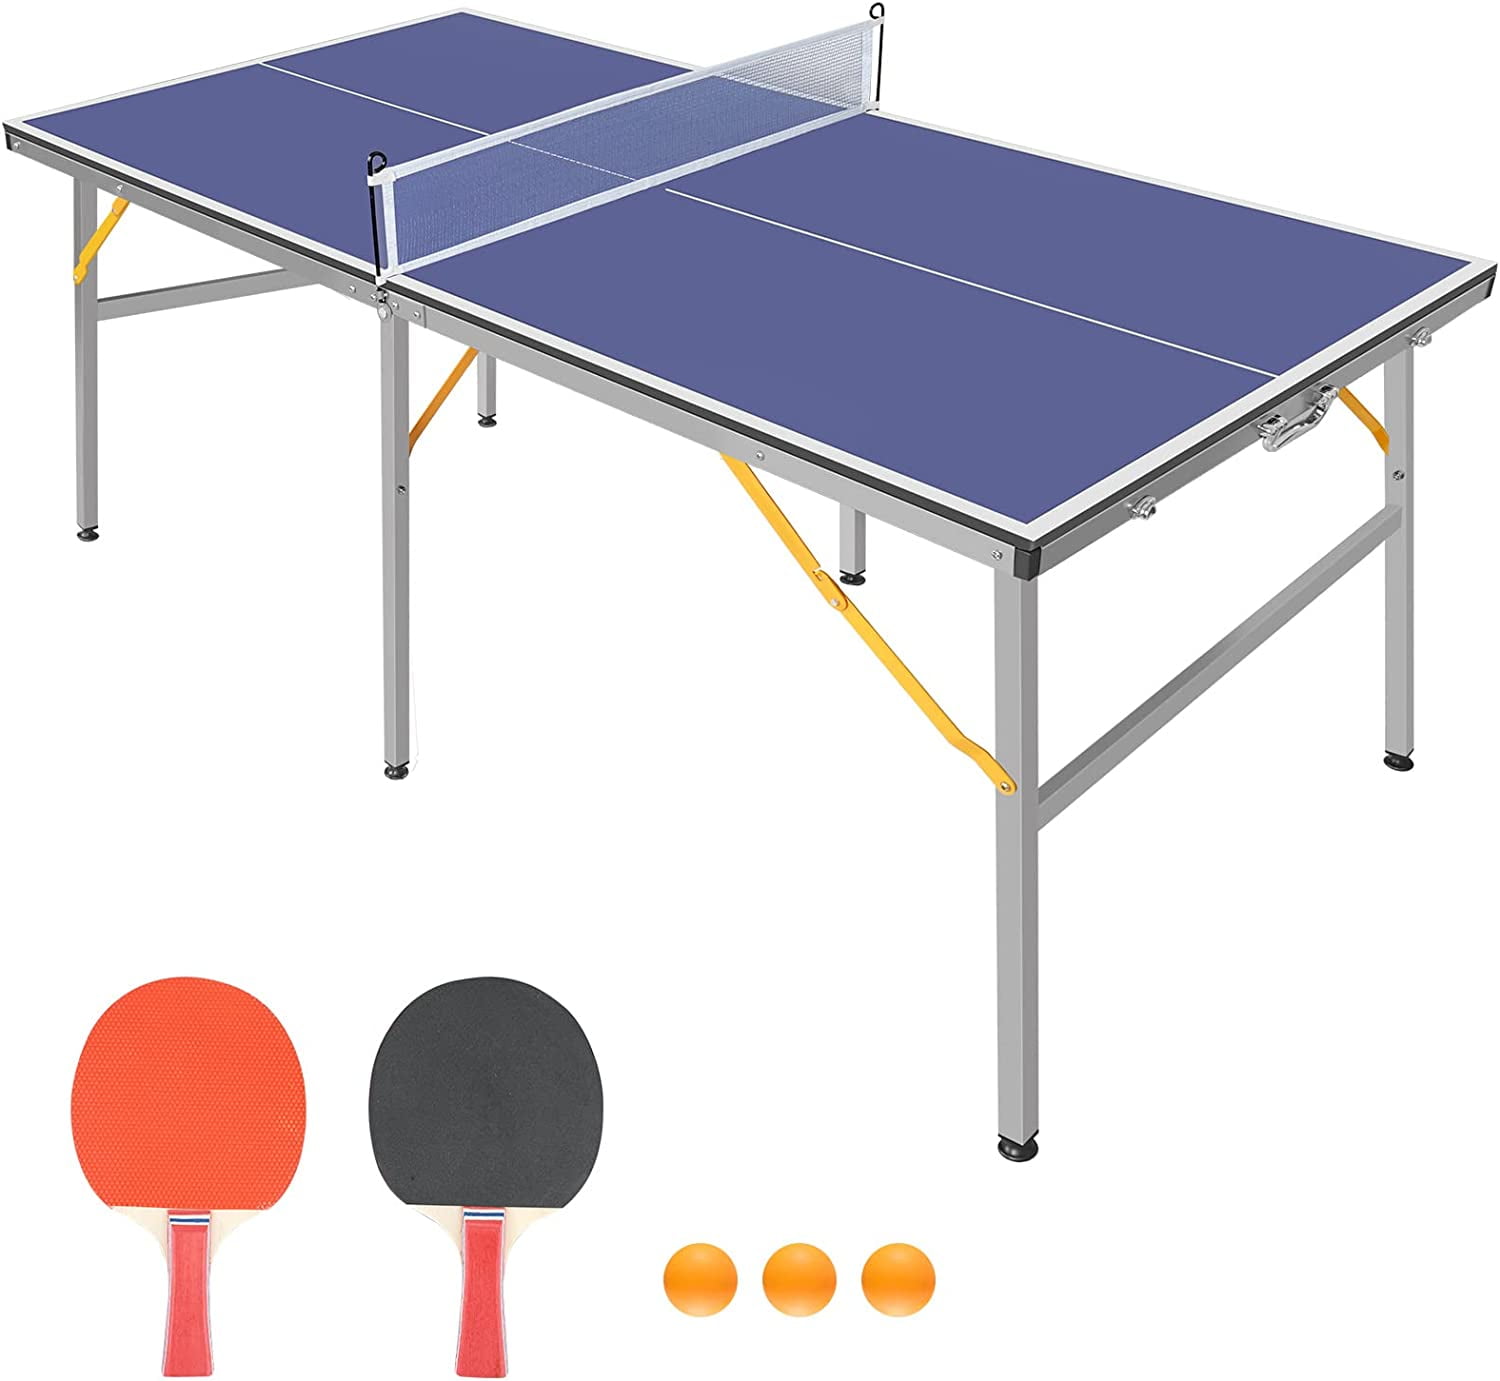 Vermont Ping Pong Table [6' x 3']